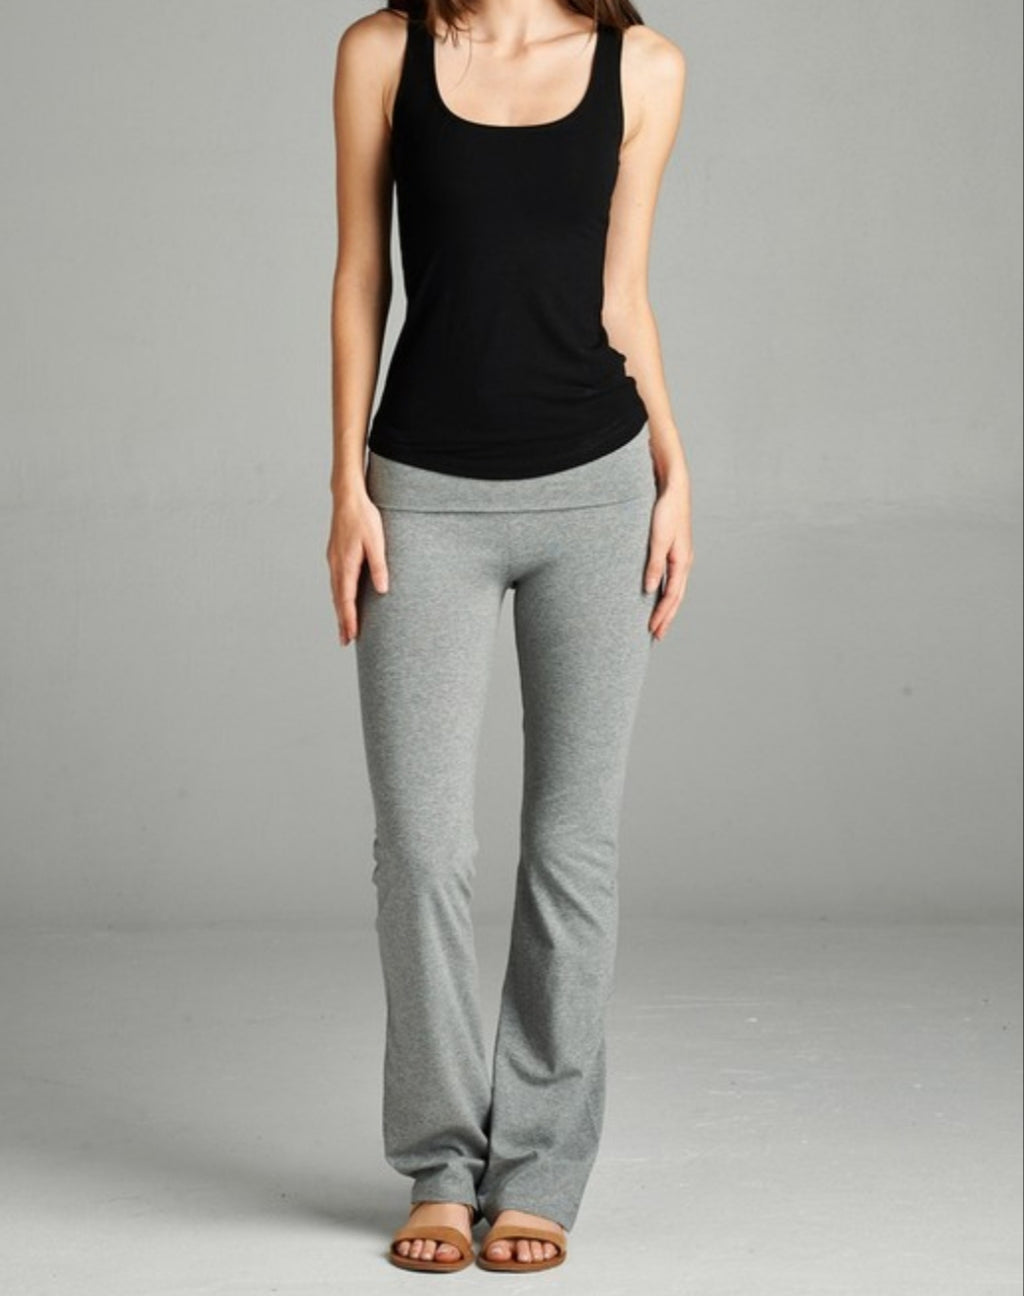 Flare Bottom Leggings With Fold Over Waist - Lookeble